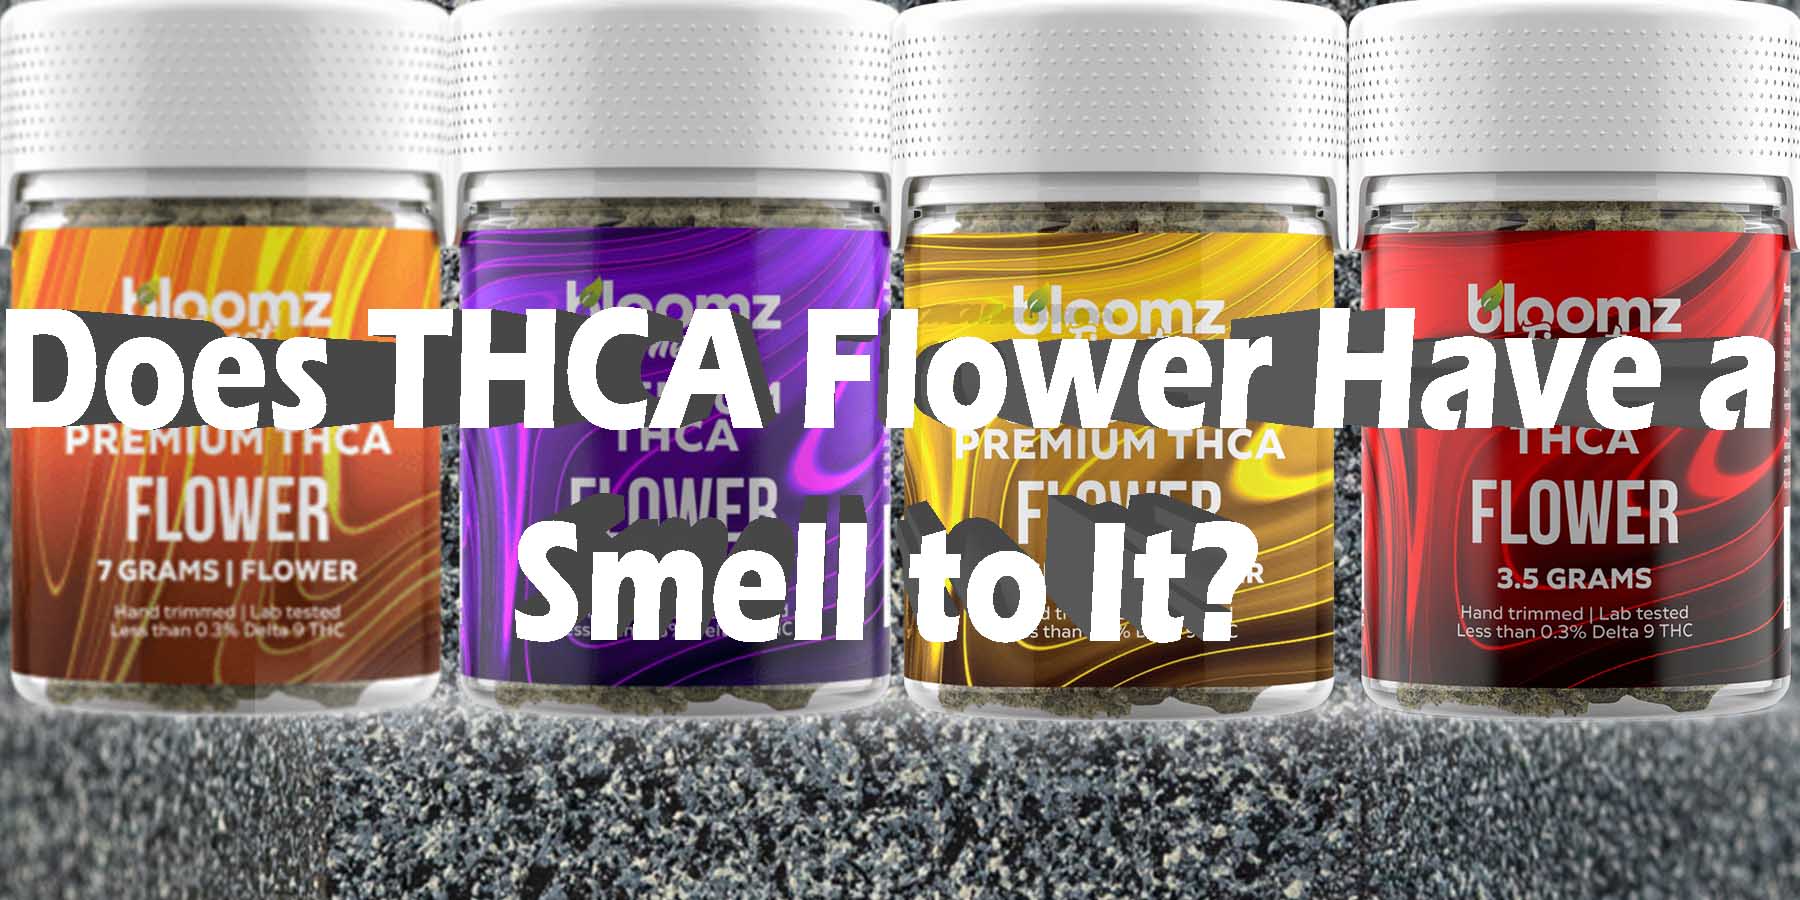 Does THCA Flower Have a Smell to It WhereToGet HowToGetNearMe BestPlace LowestPrice Coupon Discount For Smoking Best High Smoke Shop Online Near Me Strongest Binoid Bloomz.